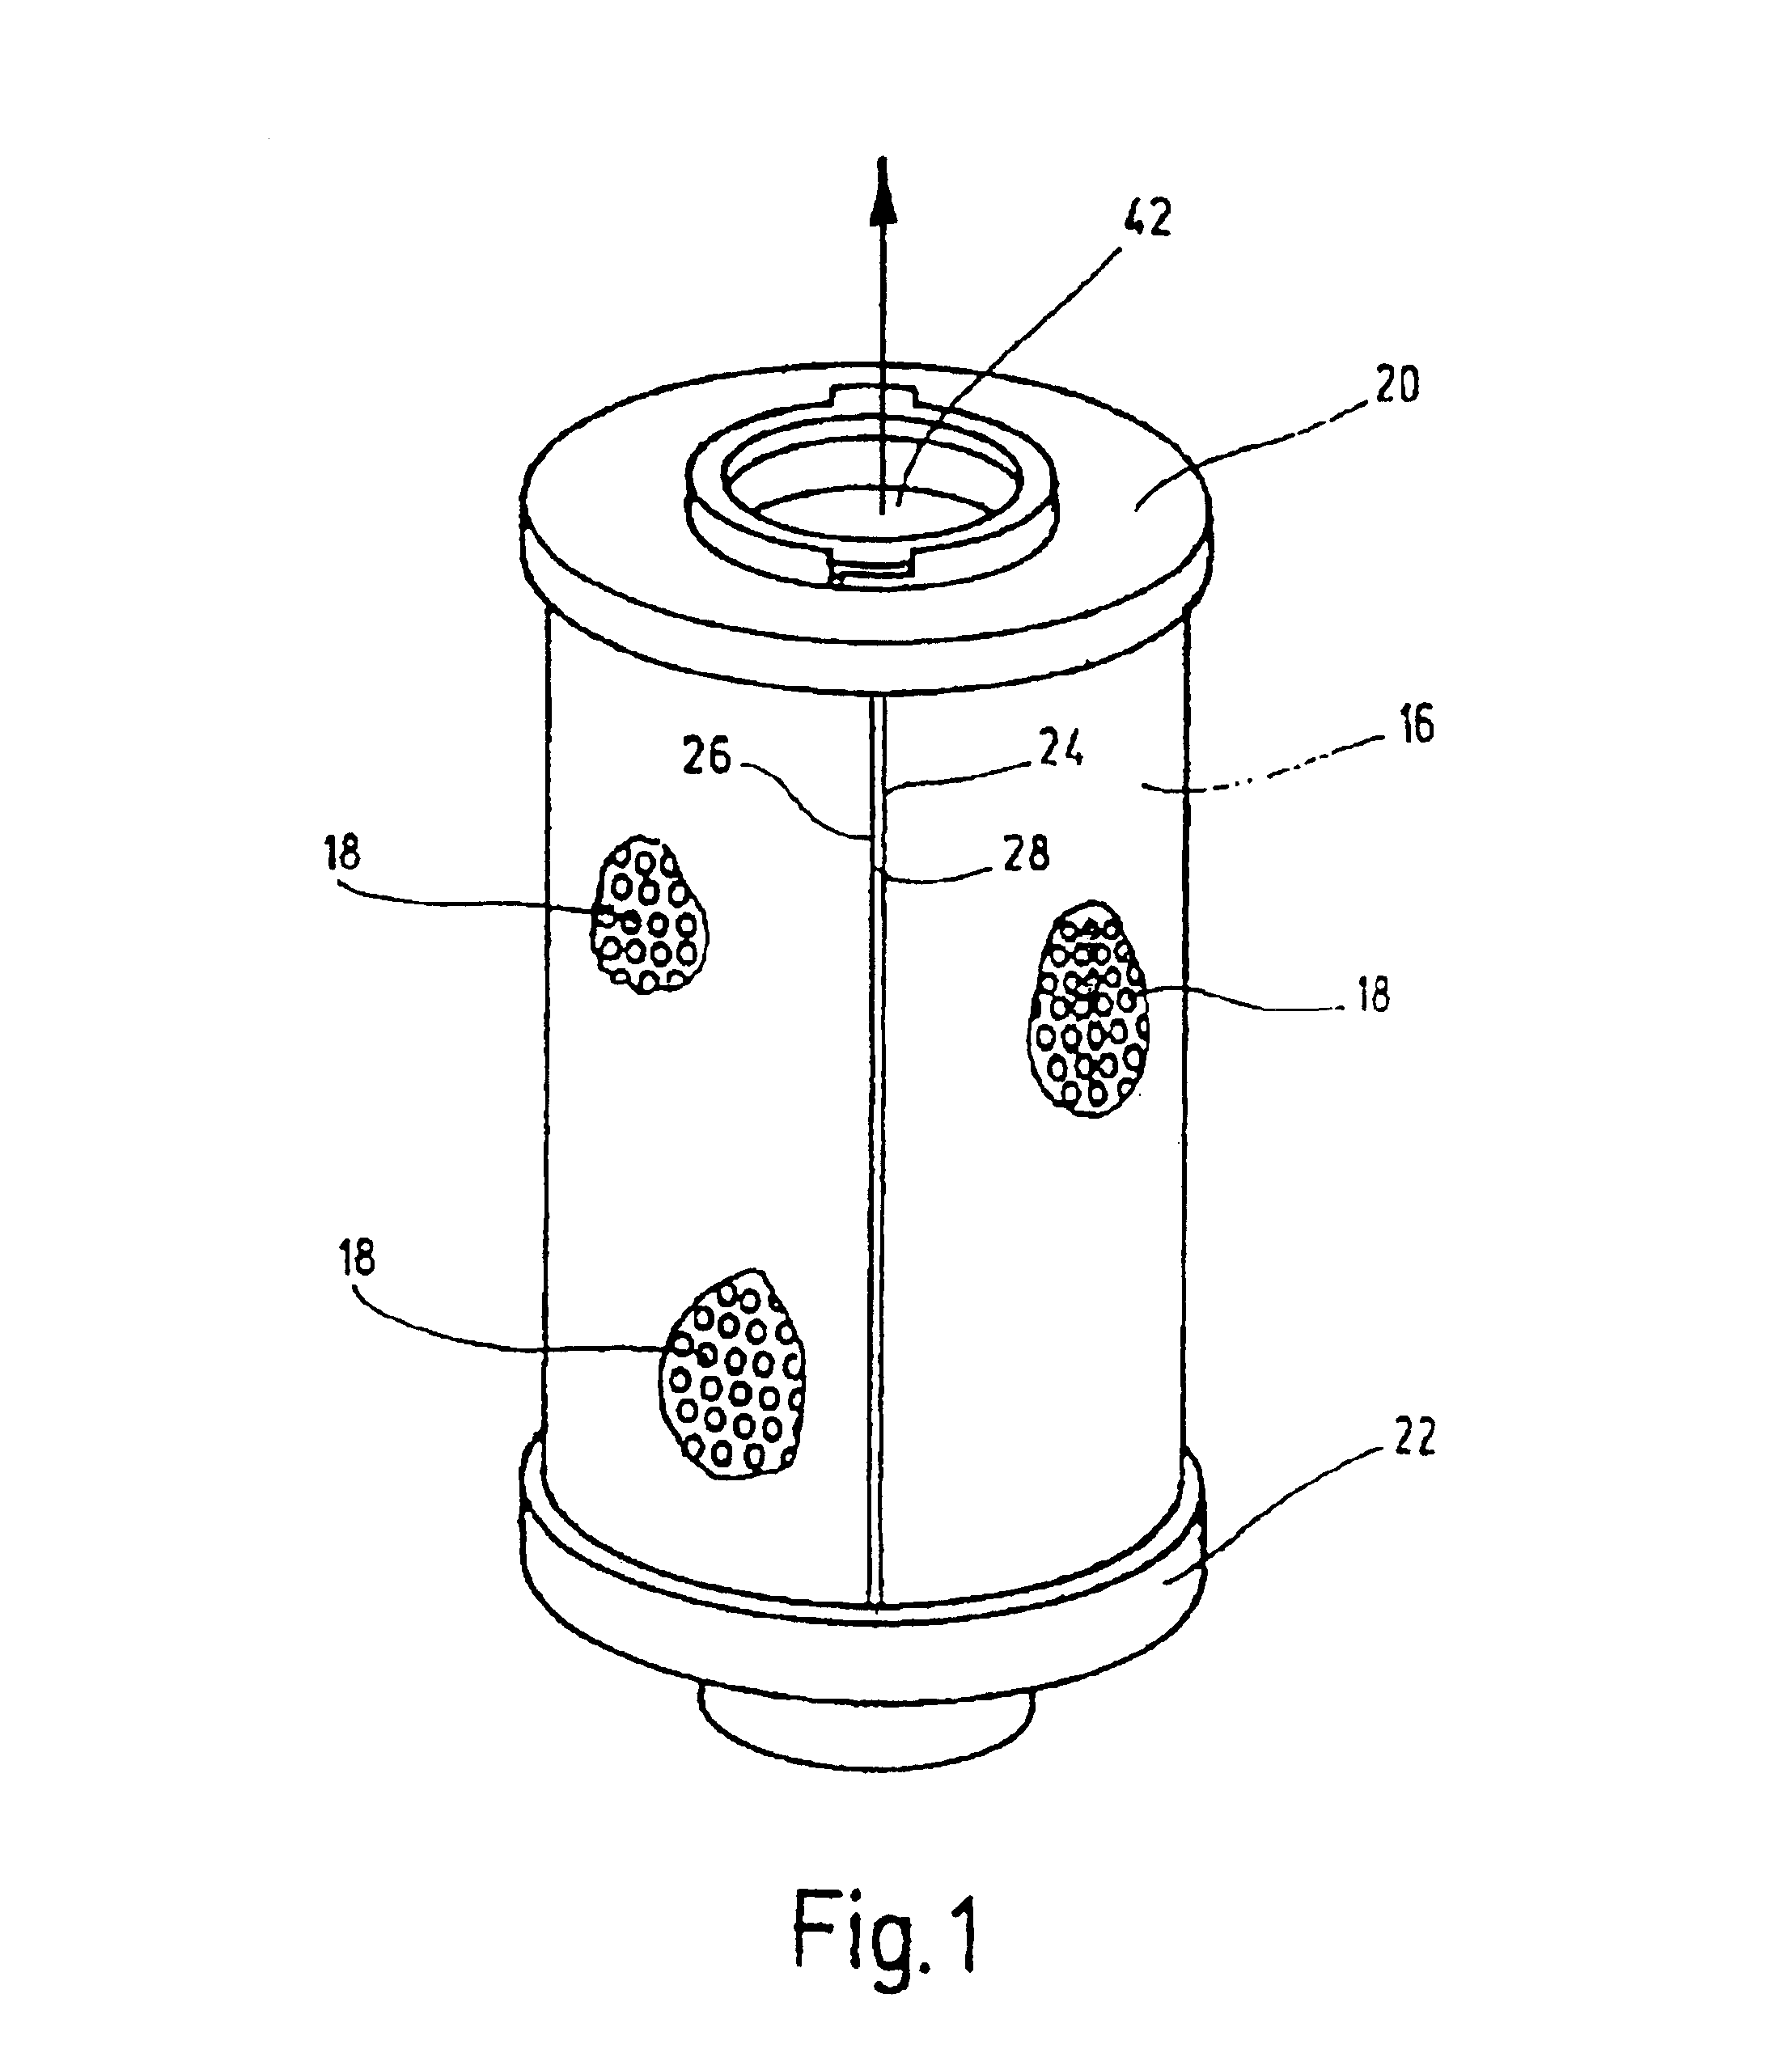 Method of assembling plastic filter element with plastic casing